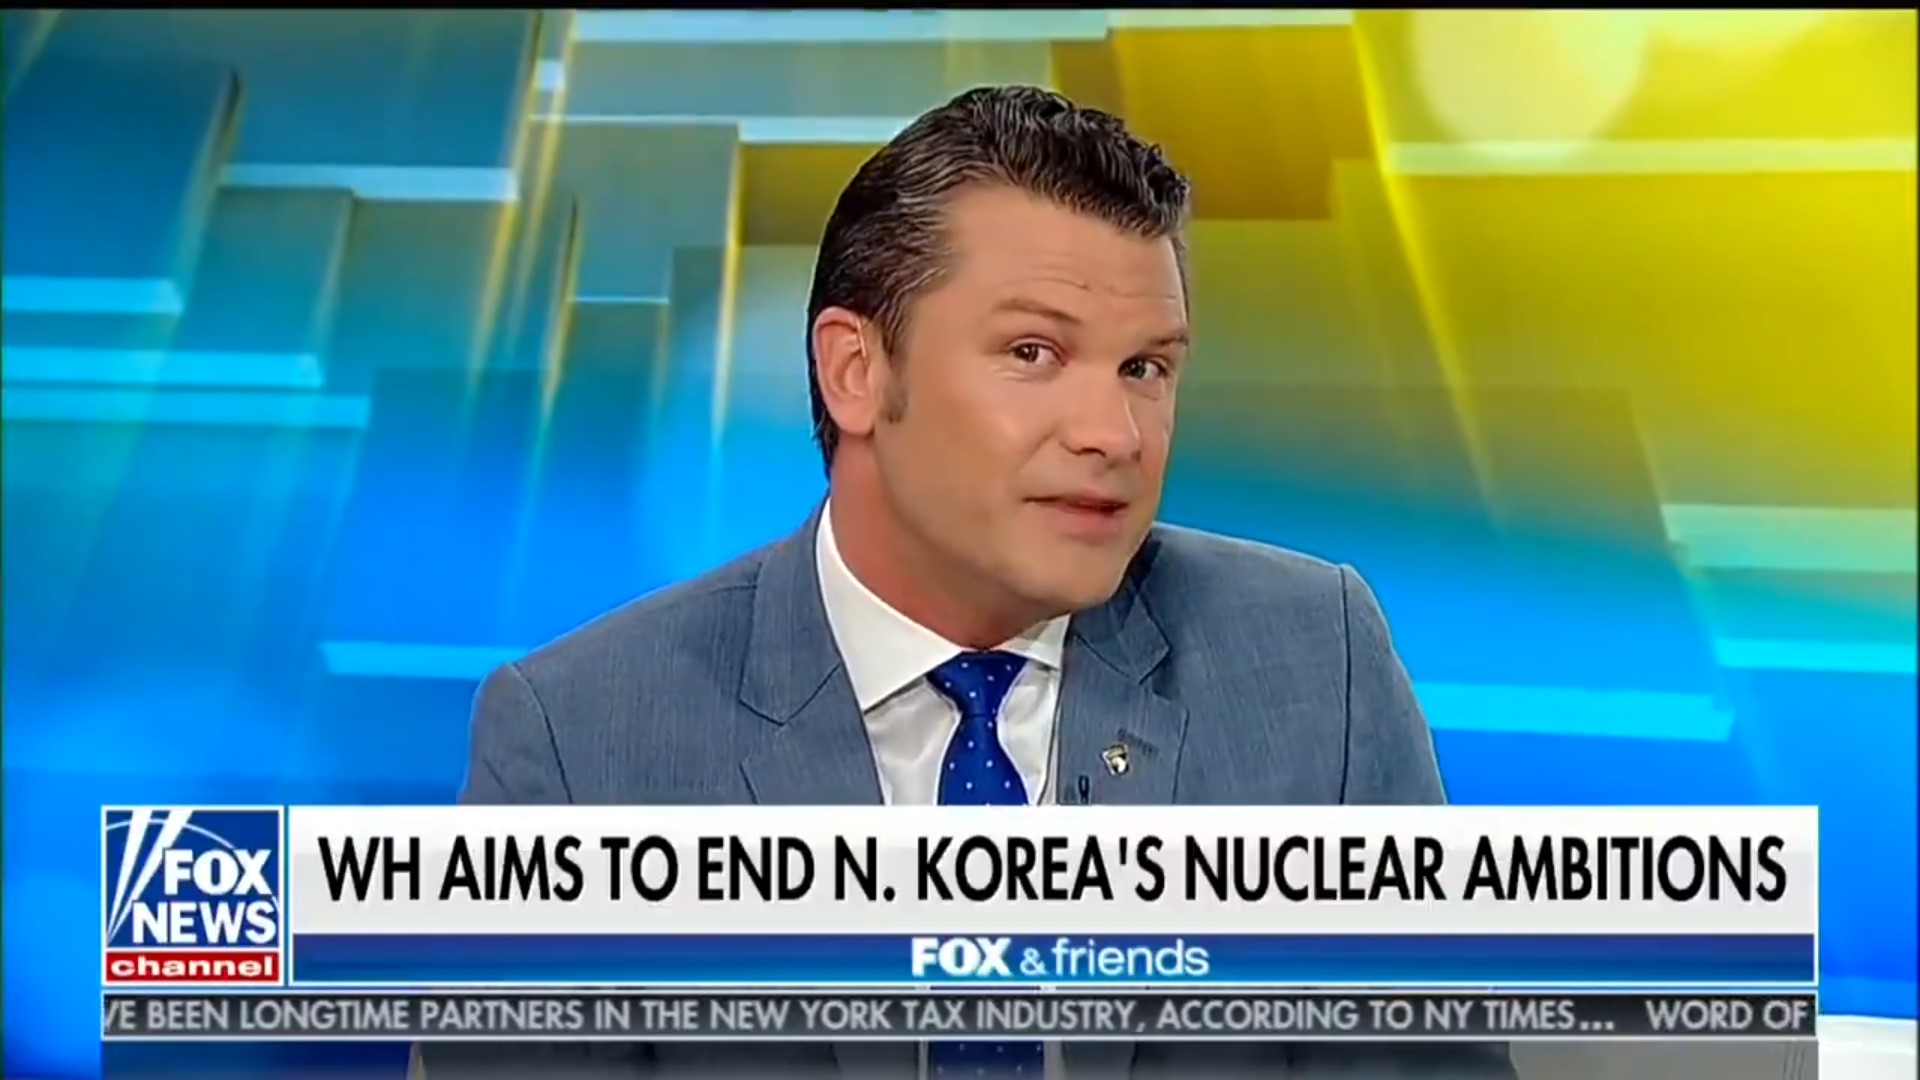 Fox’s Pete Hegseth: Kim Jong Un ‘Probably Doesn’t Love’ Having To ‘Murder His People All Day Long’